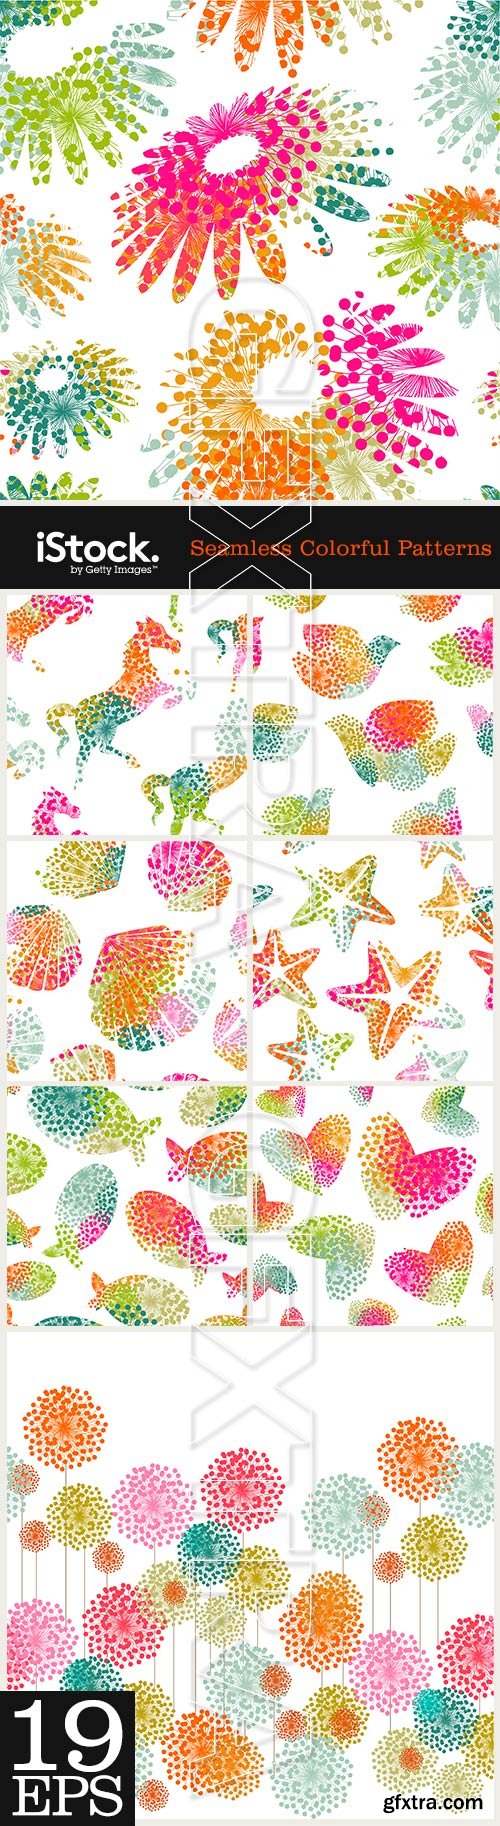 Seamless Colorful Patterns 19xEPS